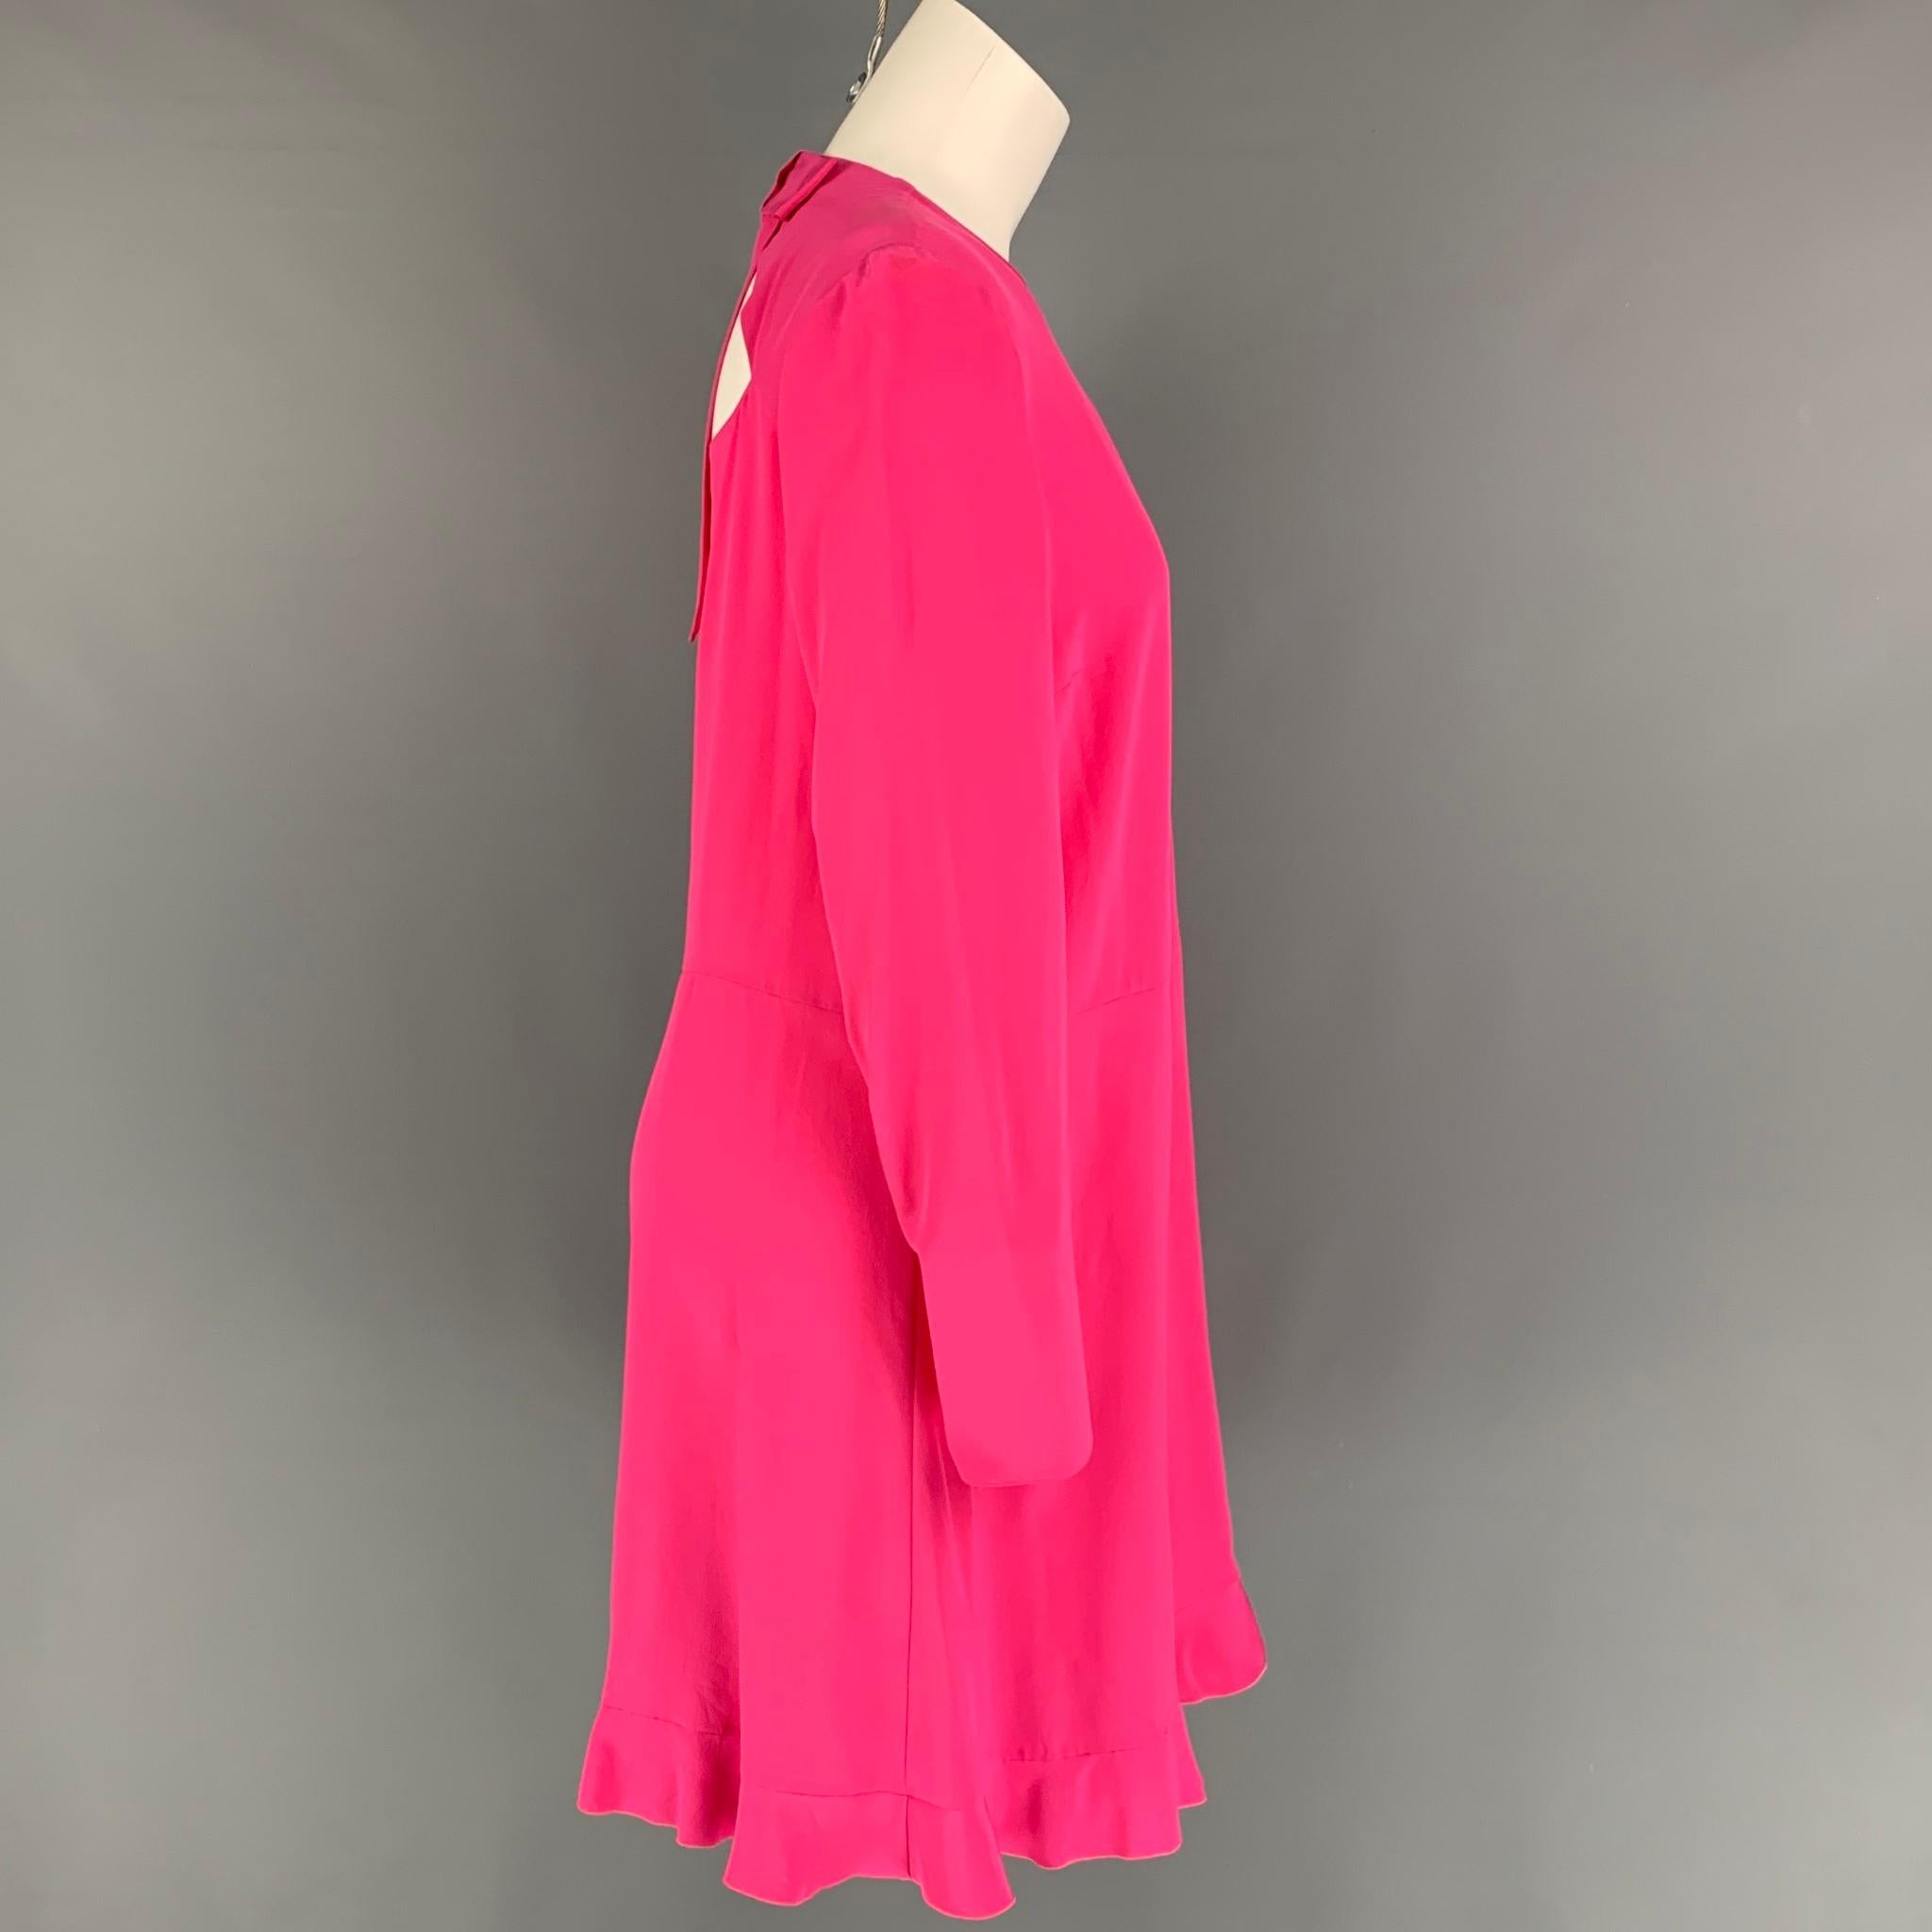 RED VALENTINO dress comes in a pink silk featuring an a-line style, ruffled hem, long sleeves, back bow detail, and a snap button closure. 

Very Good Pre-Owned Condition.
Marked: 42

Measurements:

Shoulder: 14 in.
Bust: 34 in.
Waist: 36 in.
Hip: